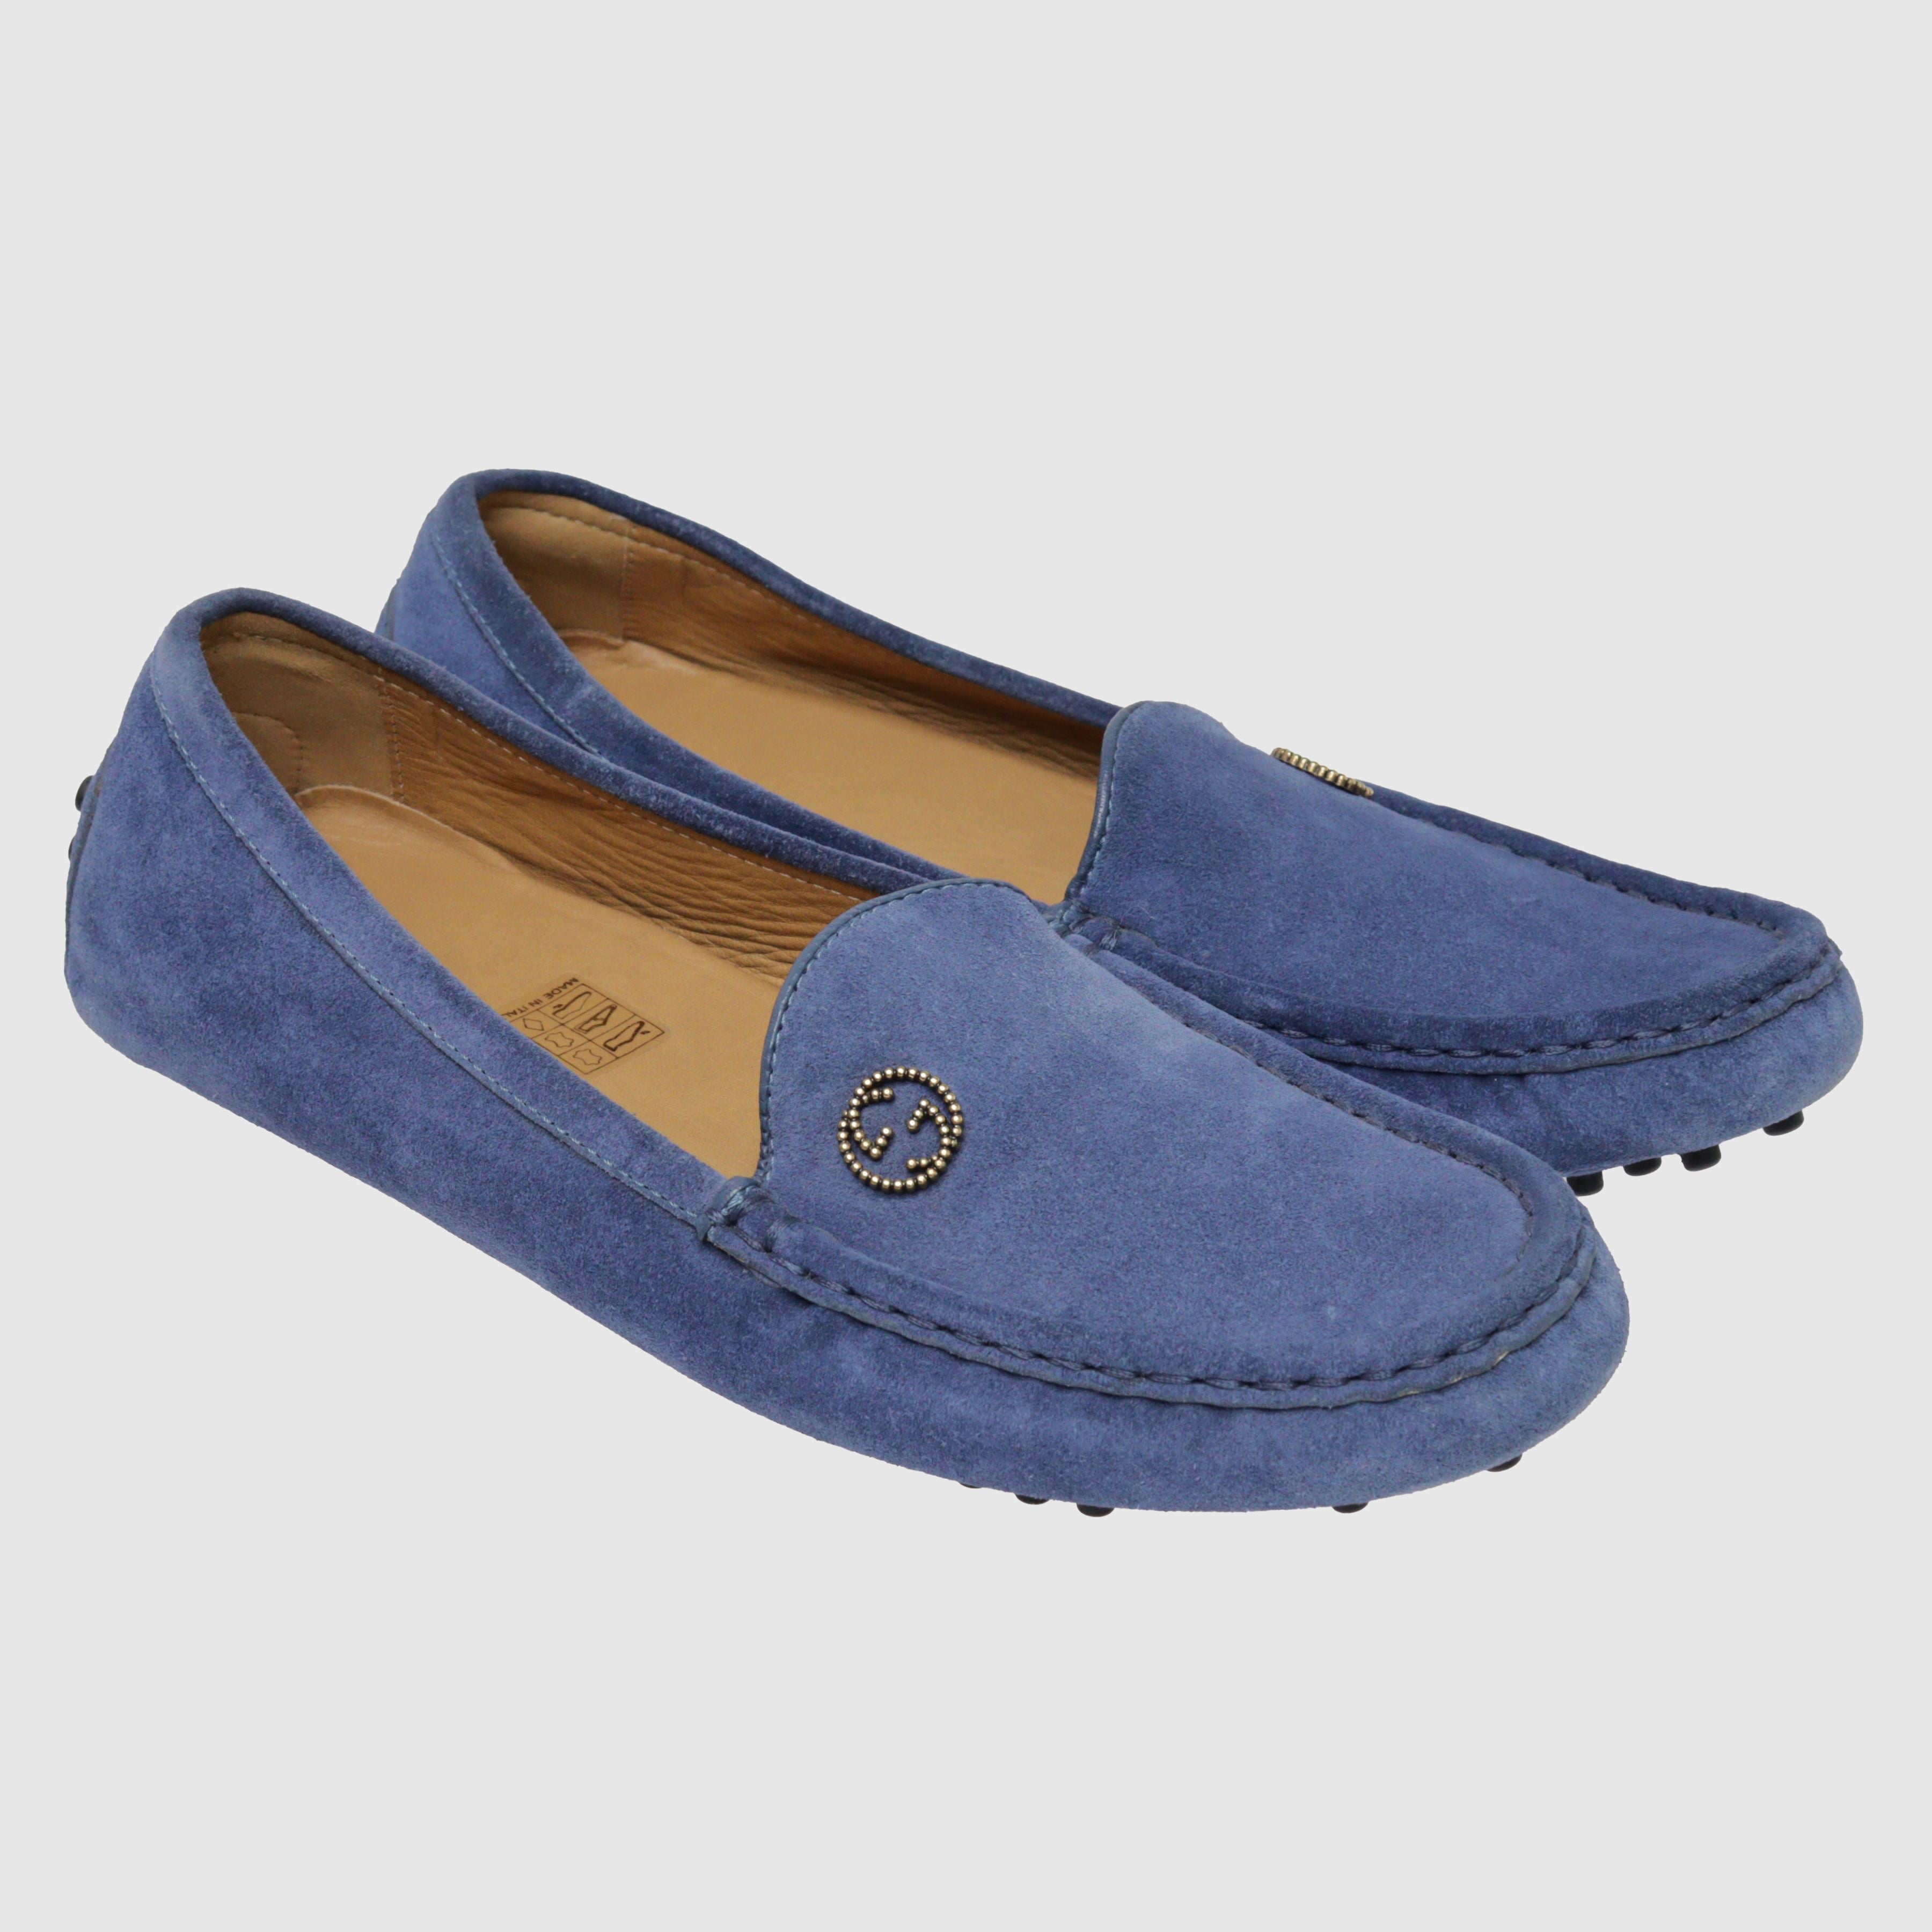 Blue GG Interlocking Loafers Shoes Gucci 